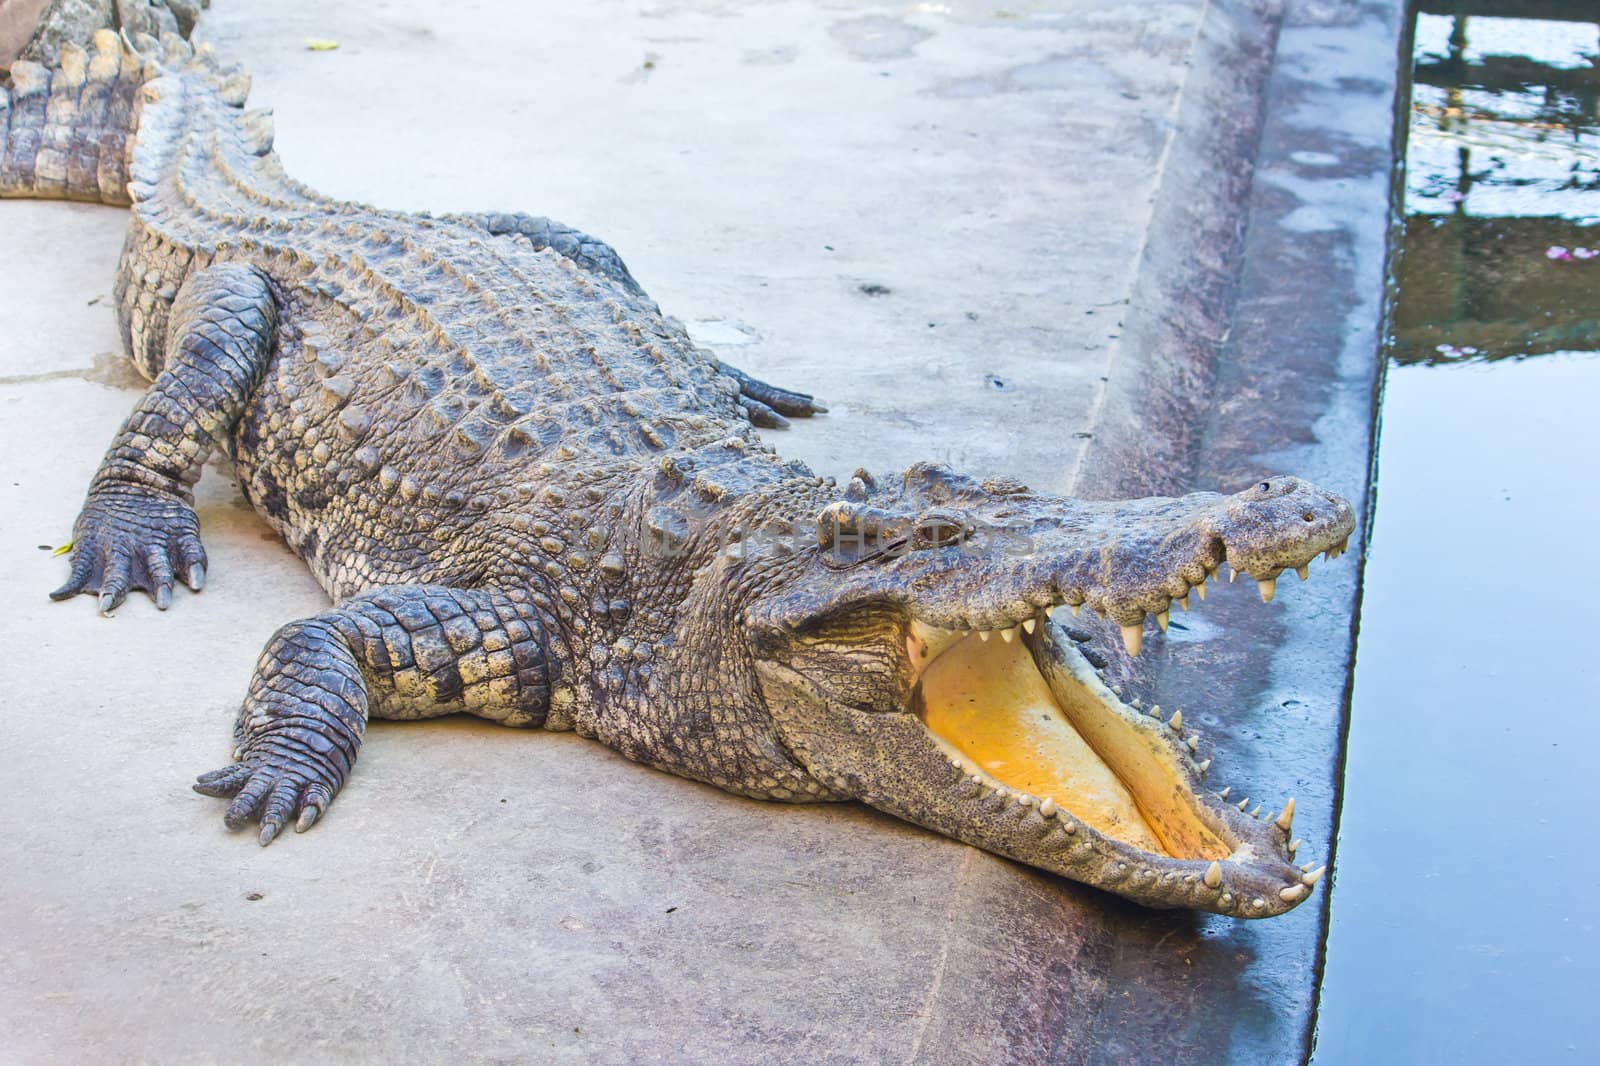 Dangerous crocodile open mouth  by tungphoto